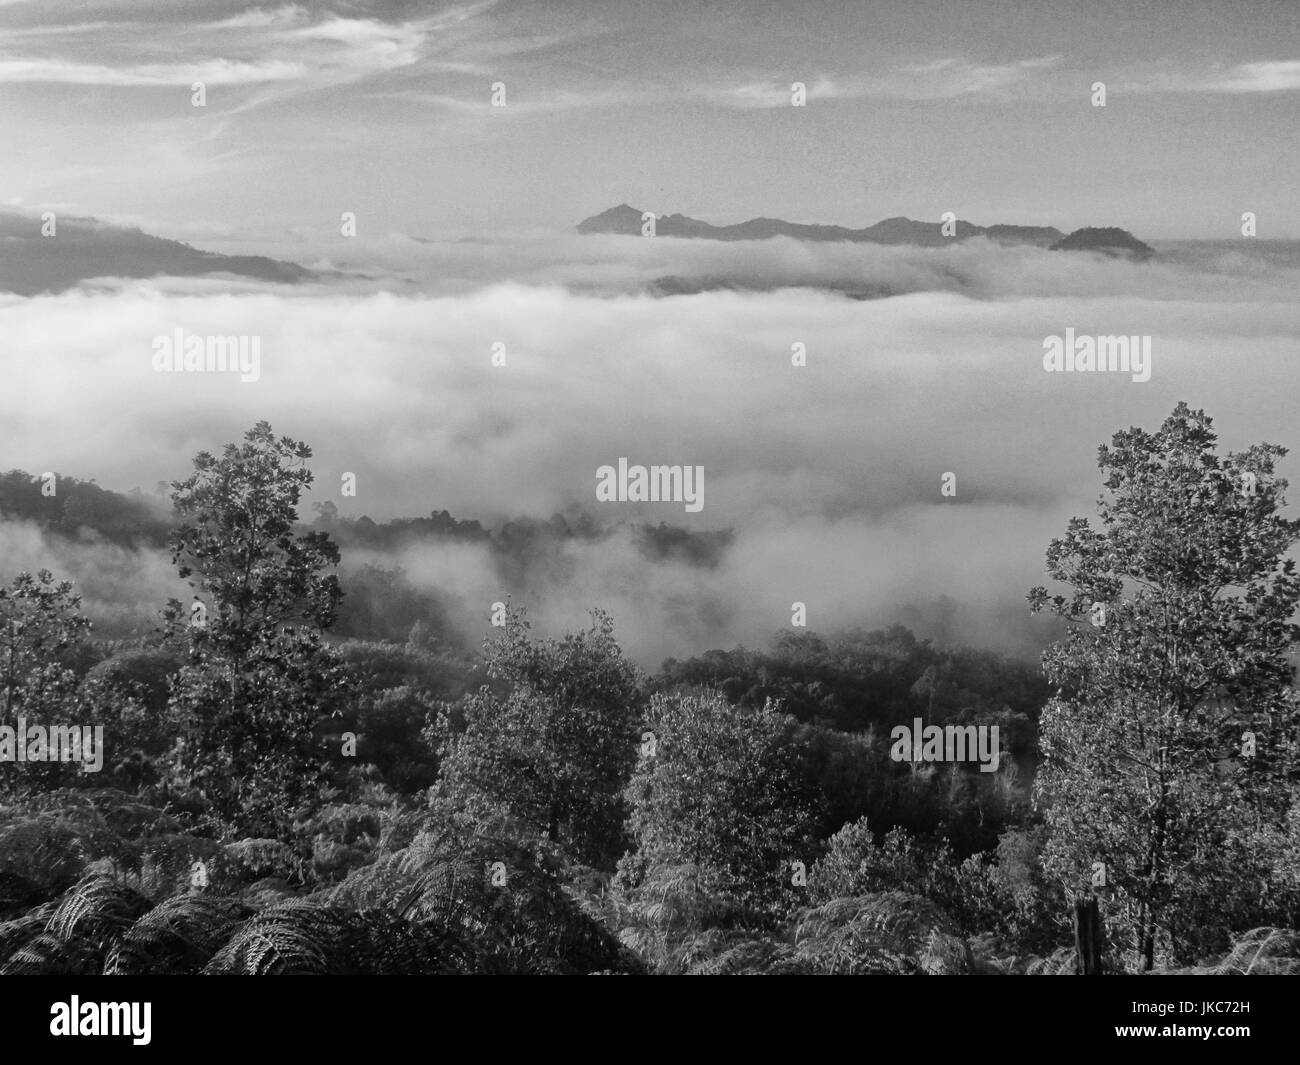 Morning view of the horizon from above the clouds in Bonkud, Borneo in black and white Stock Photo